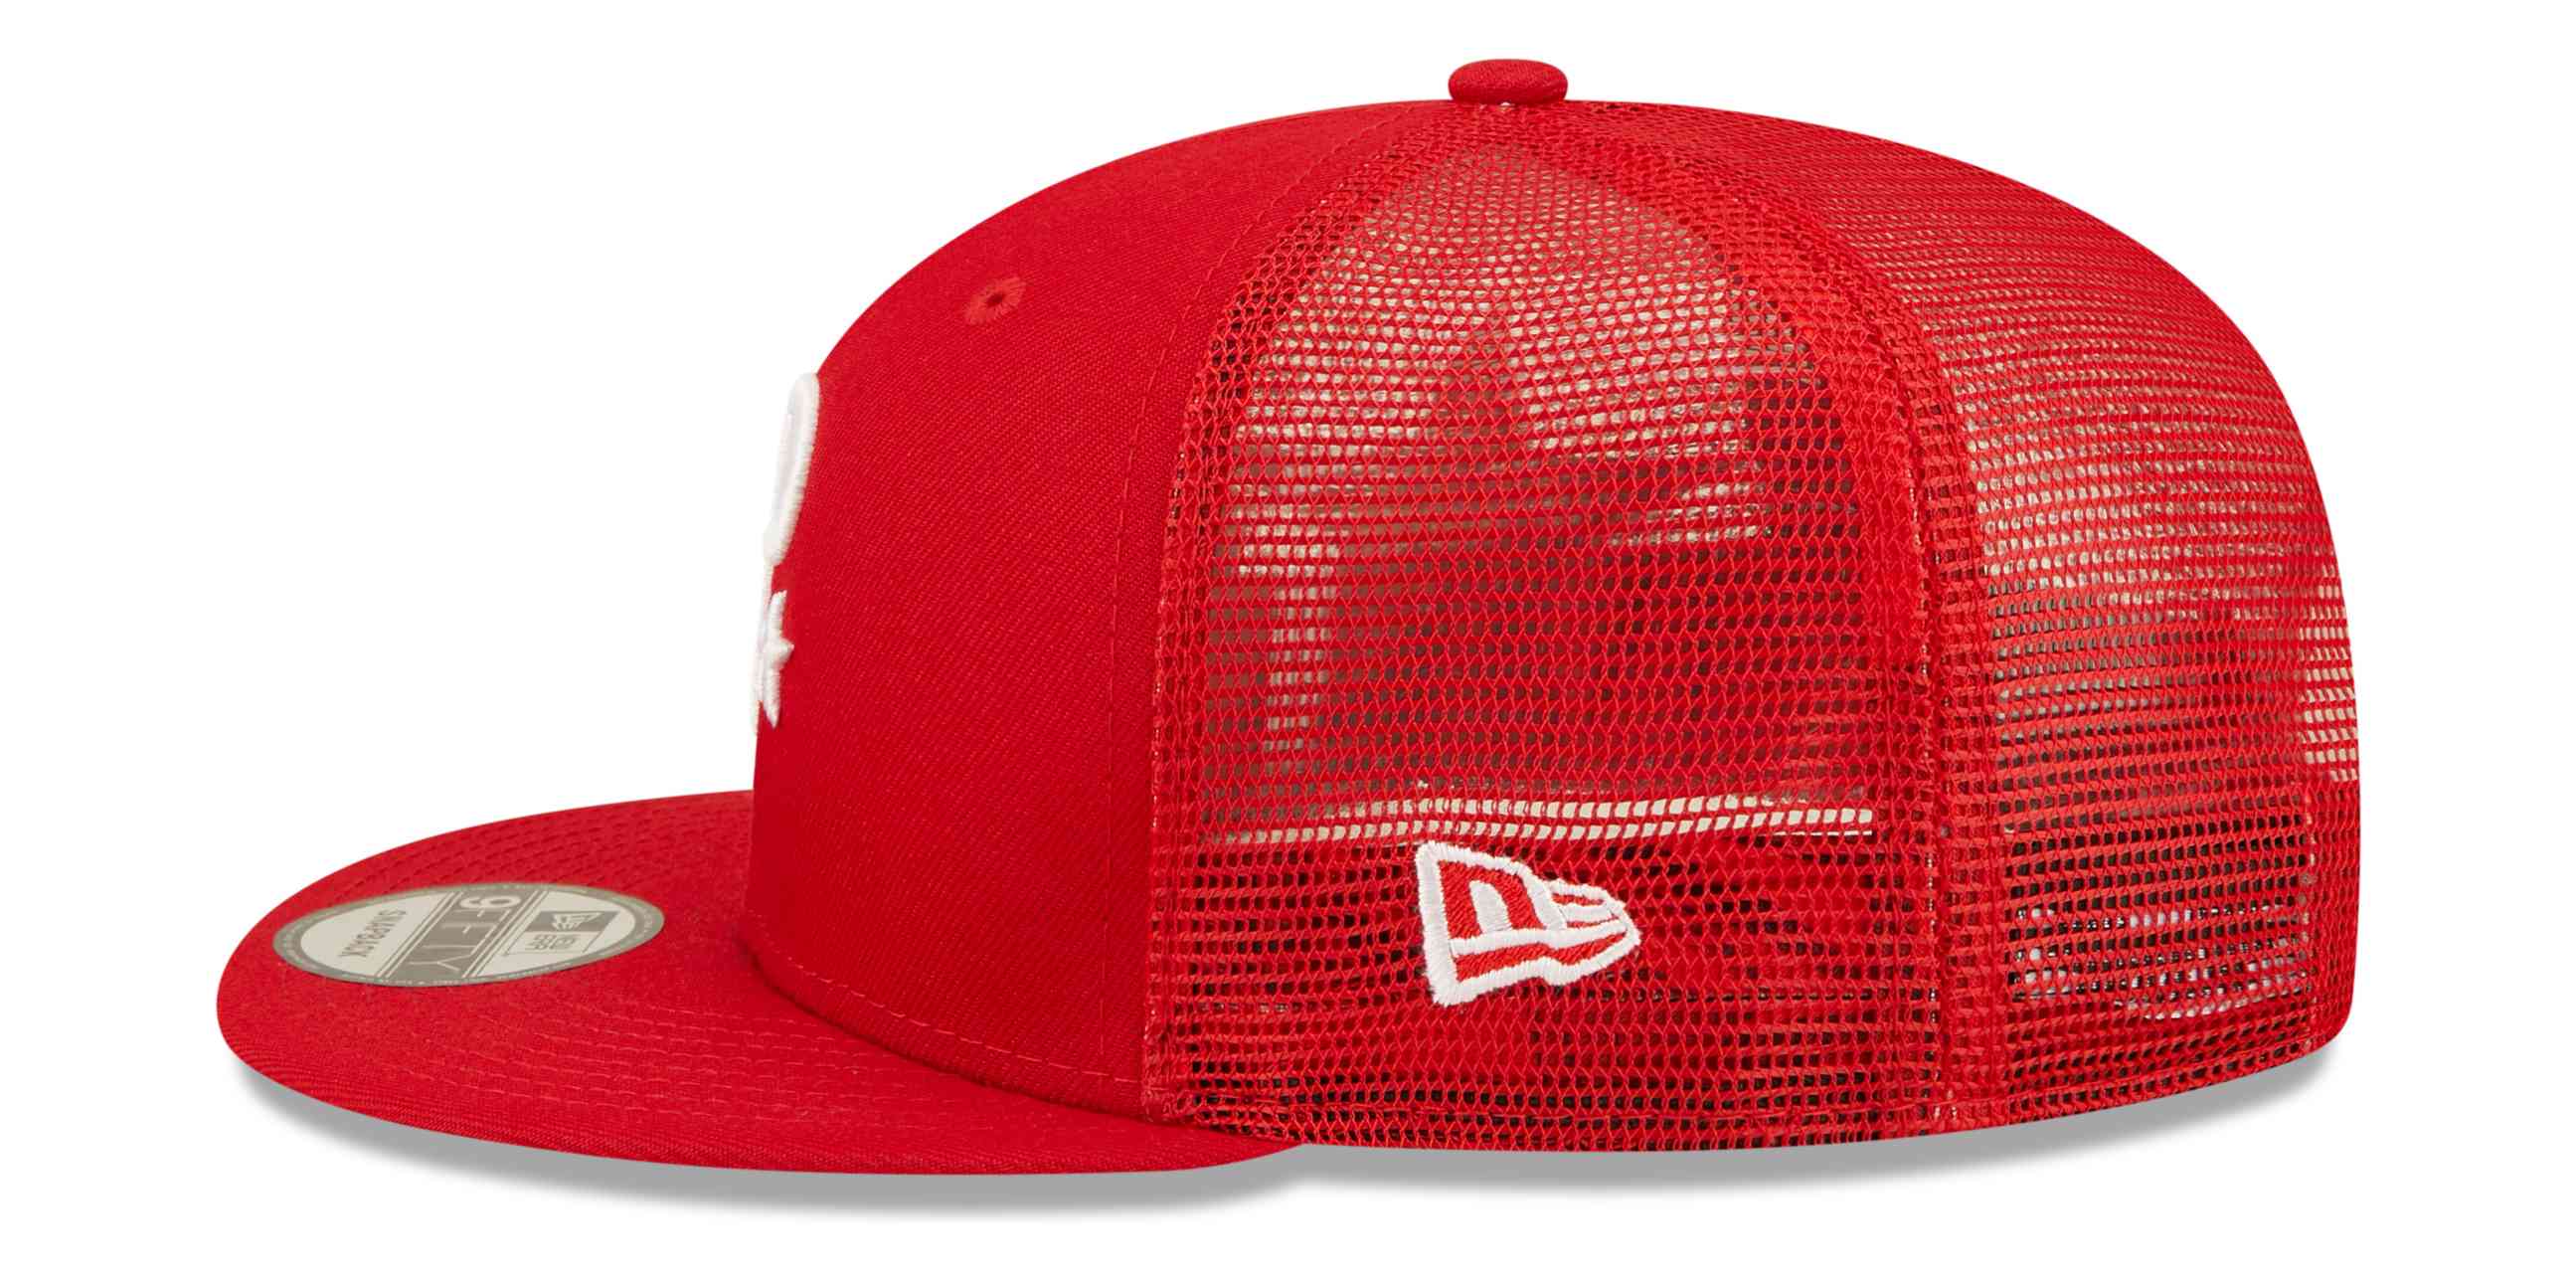 New Era - MLB Philadelphia Phillies All Star Game Patch 9Fifty